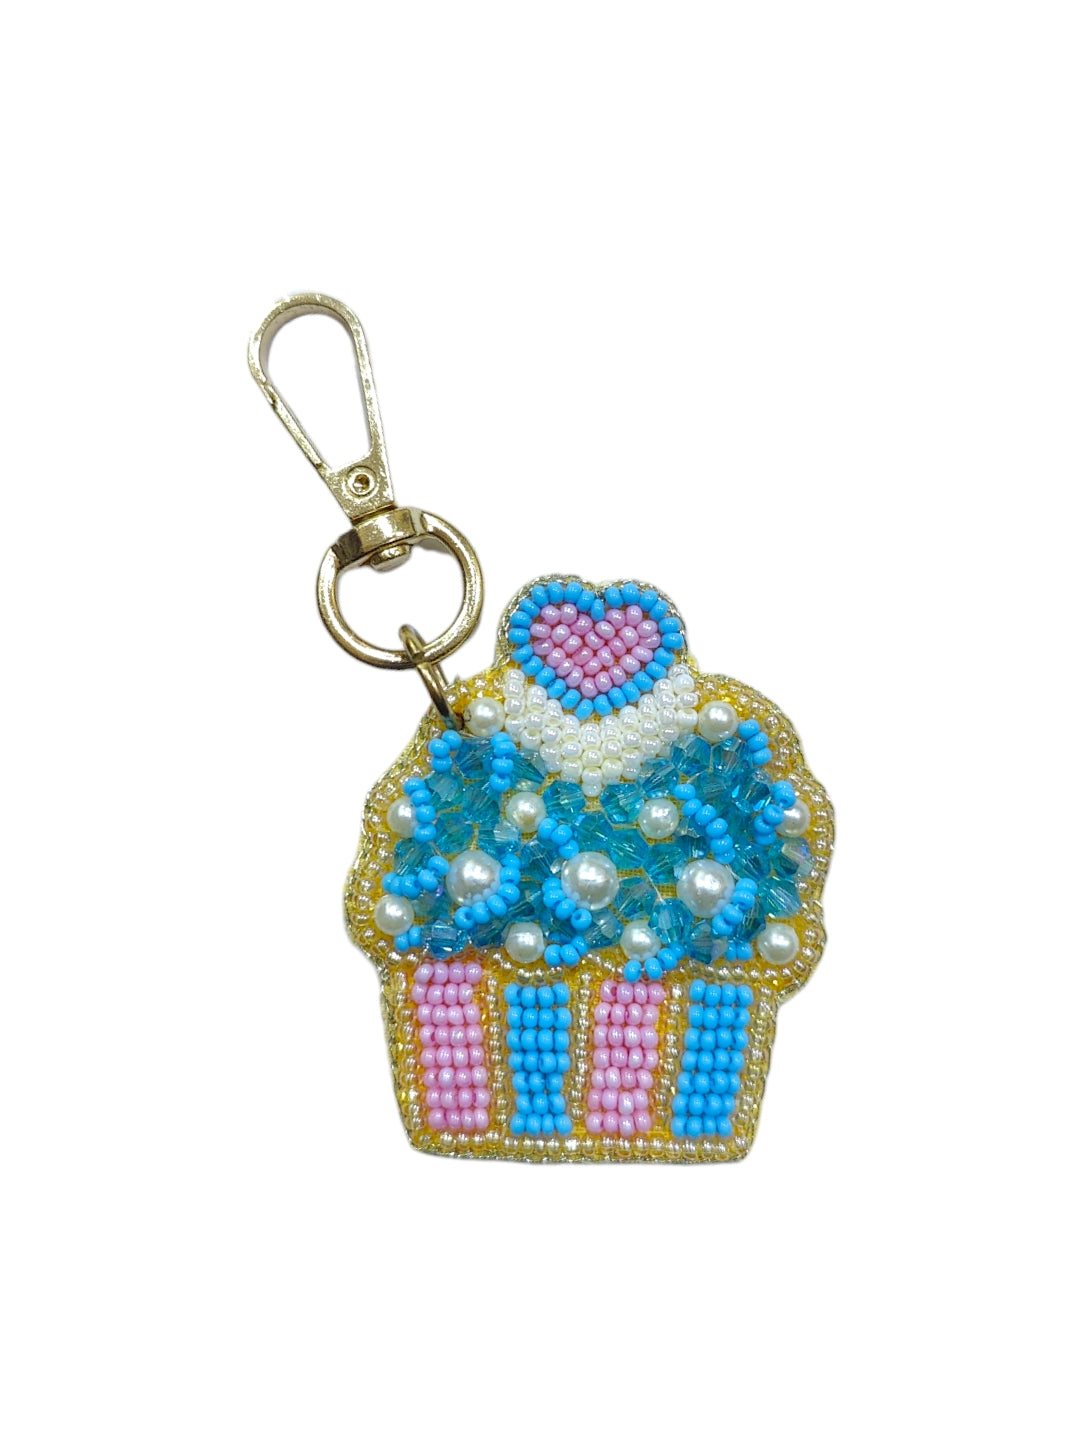 Attach the cupcake charm to your bag or keychain for instant charm.